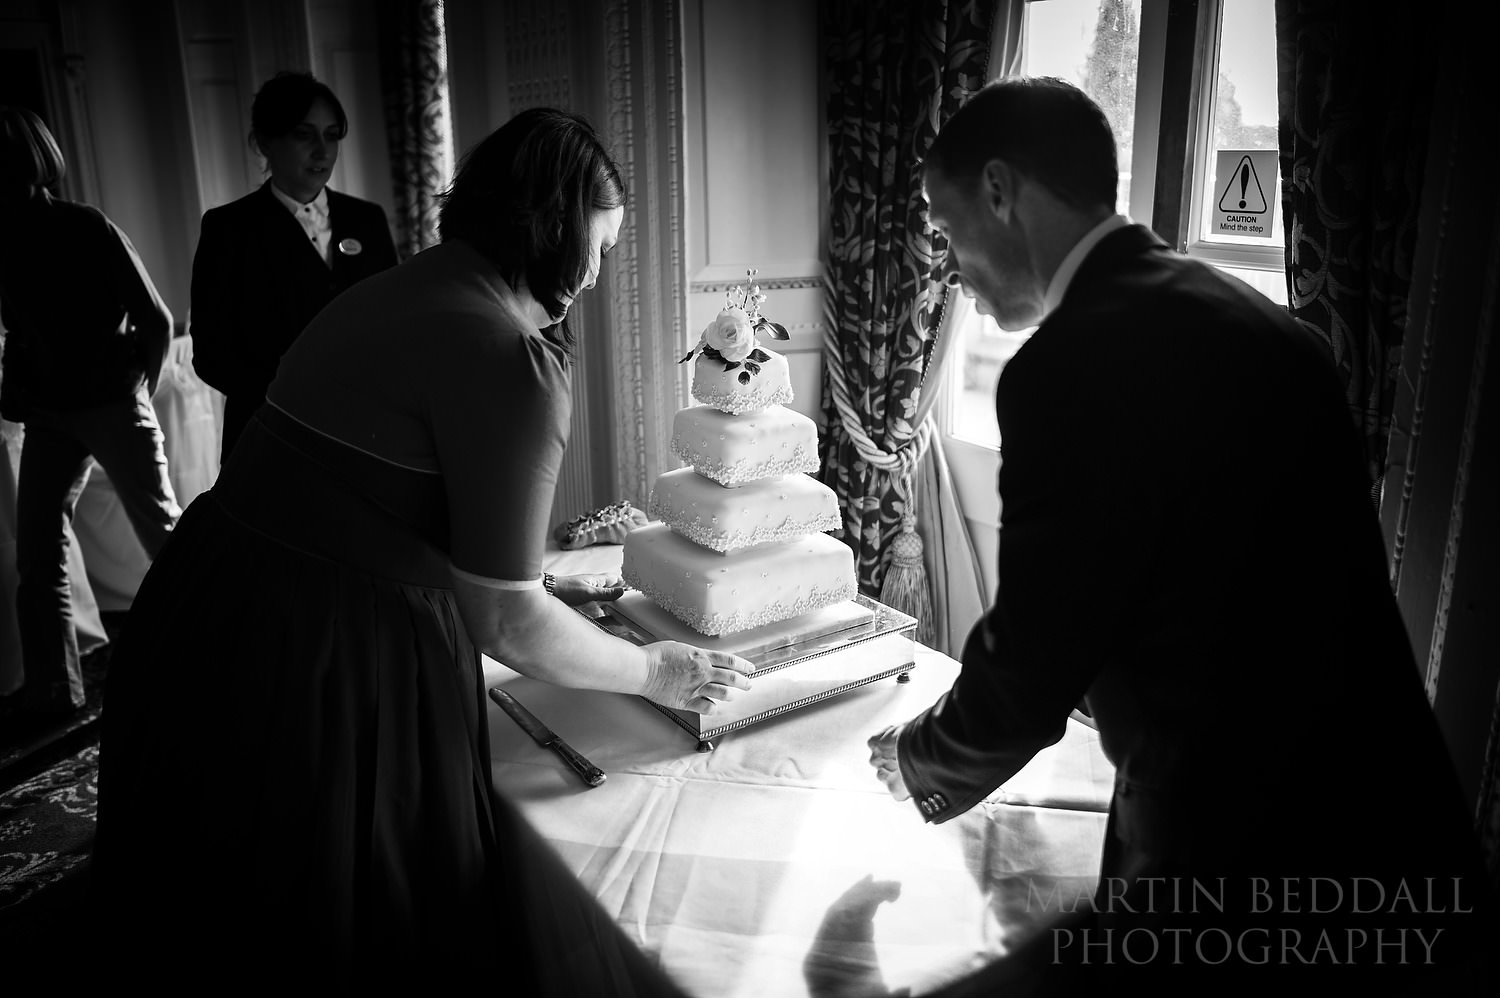 Setting up the wedding cake at Buxted Park wedding